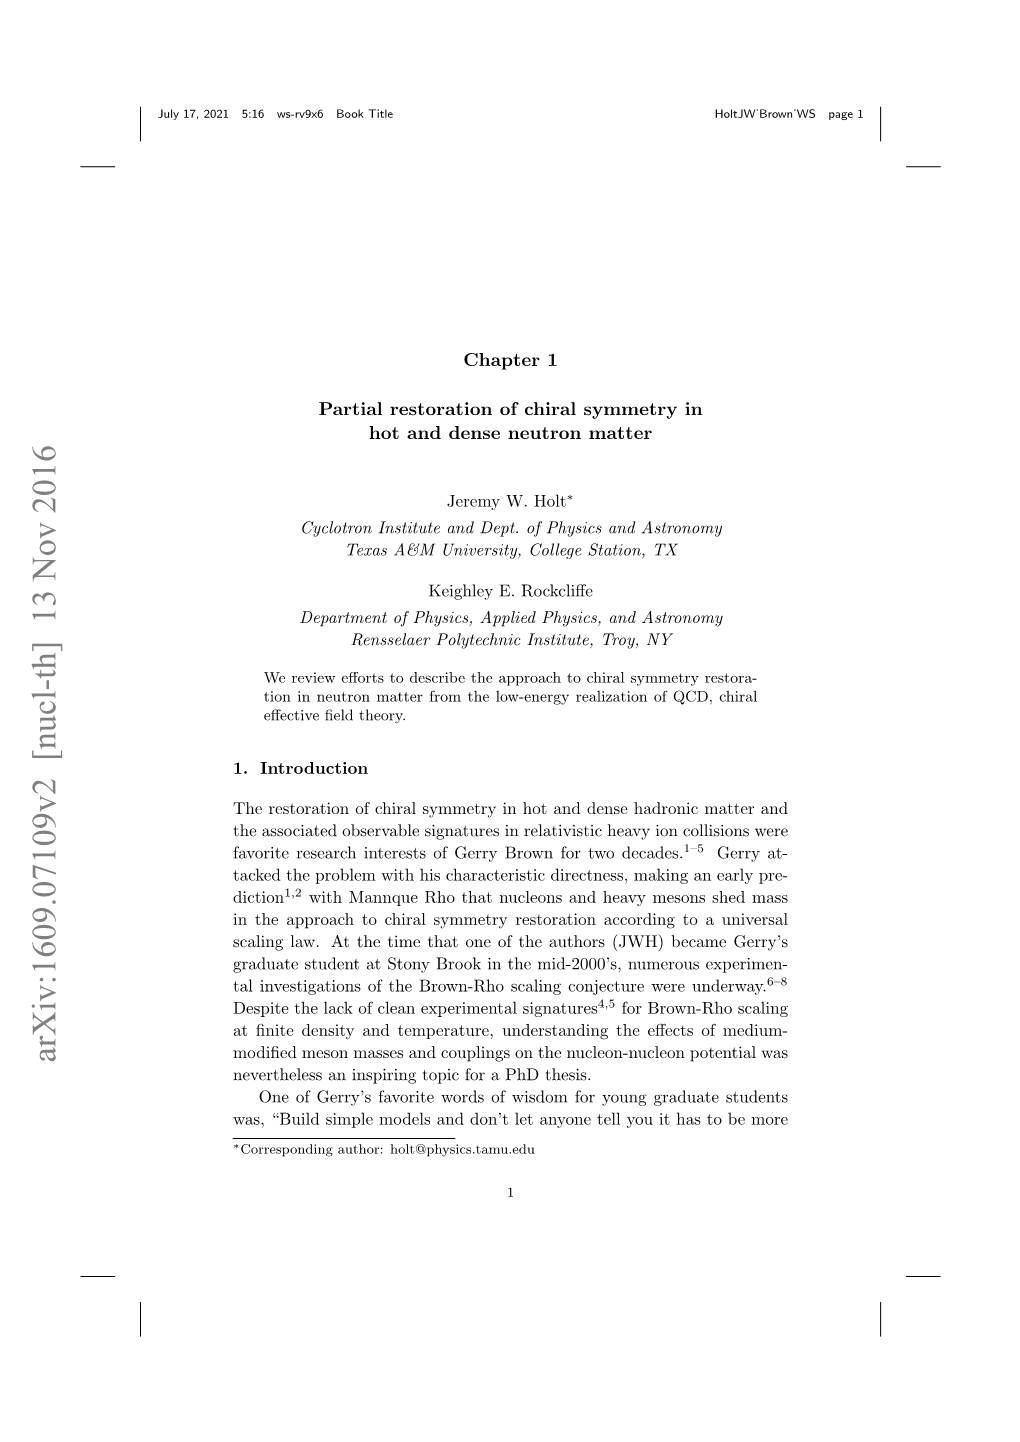 Partial Restoration of Chiral Symmetry in Hot and Dense Neutron Matter